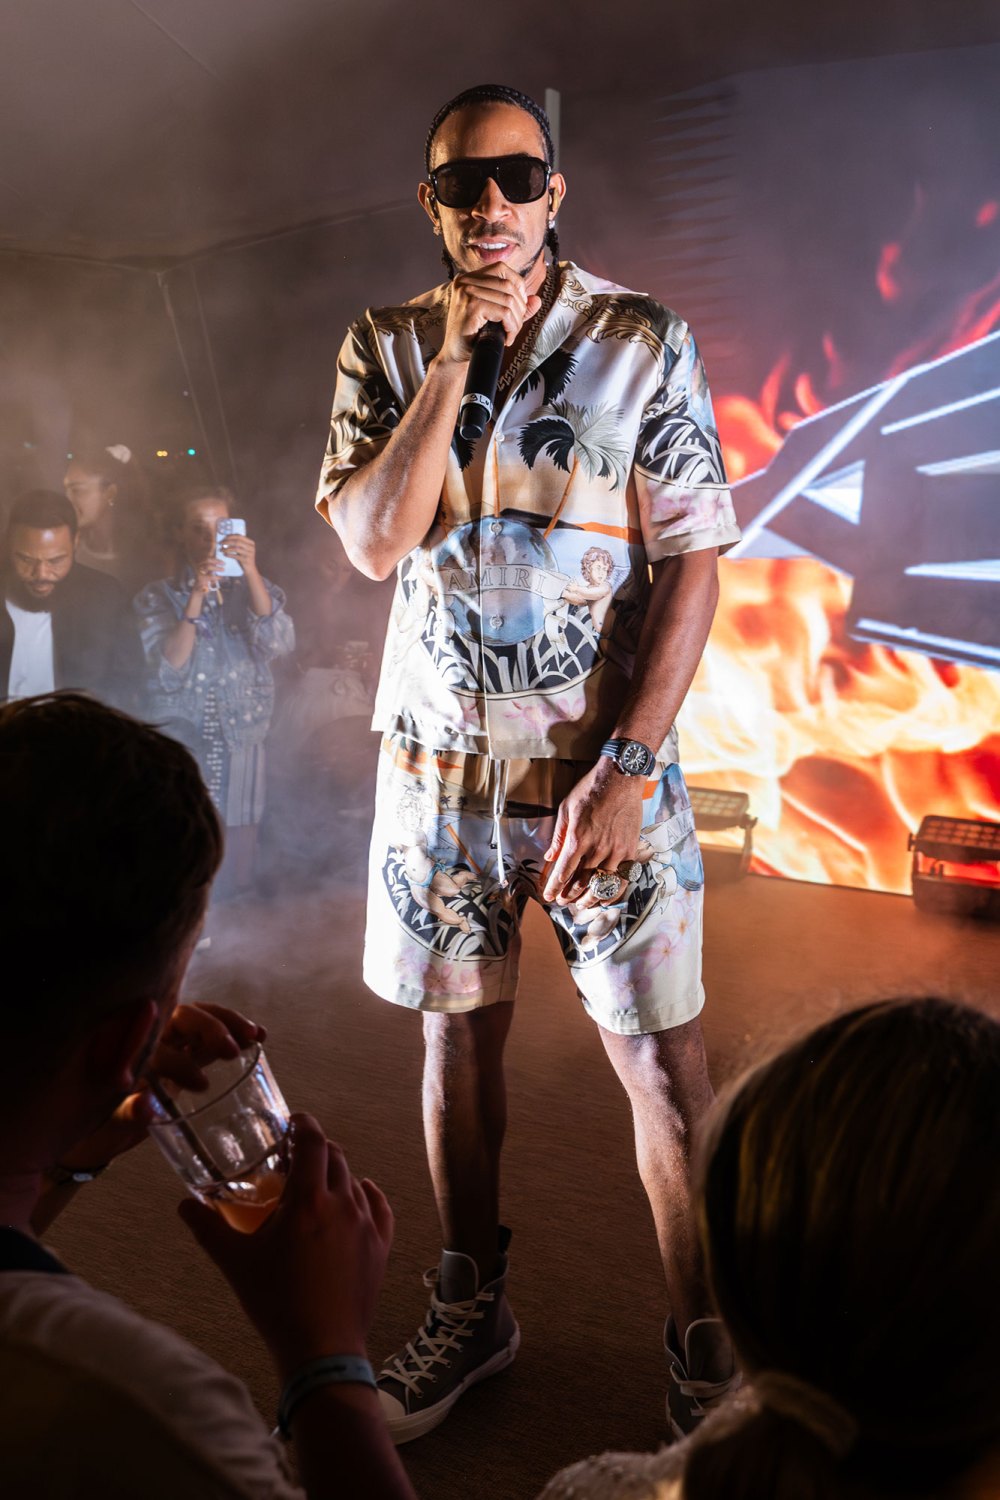 Ludacris Urban One Influential Brand Innovators Bash Performance at Cannes